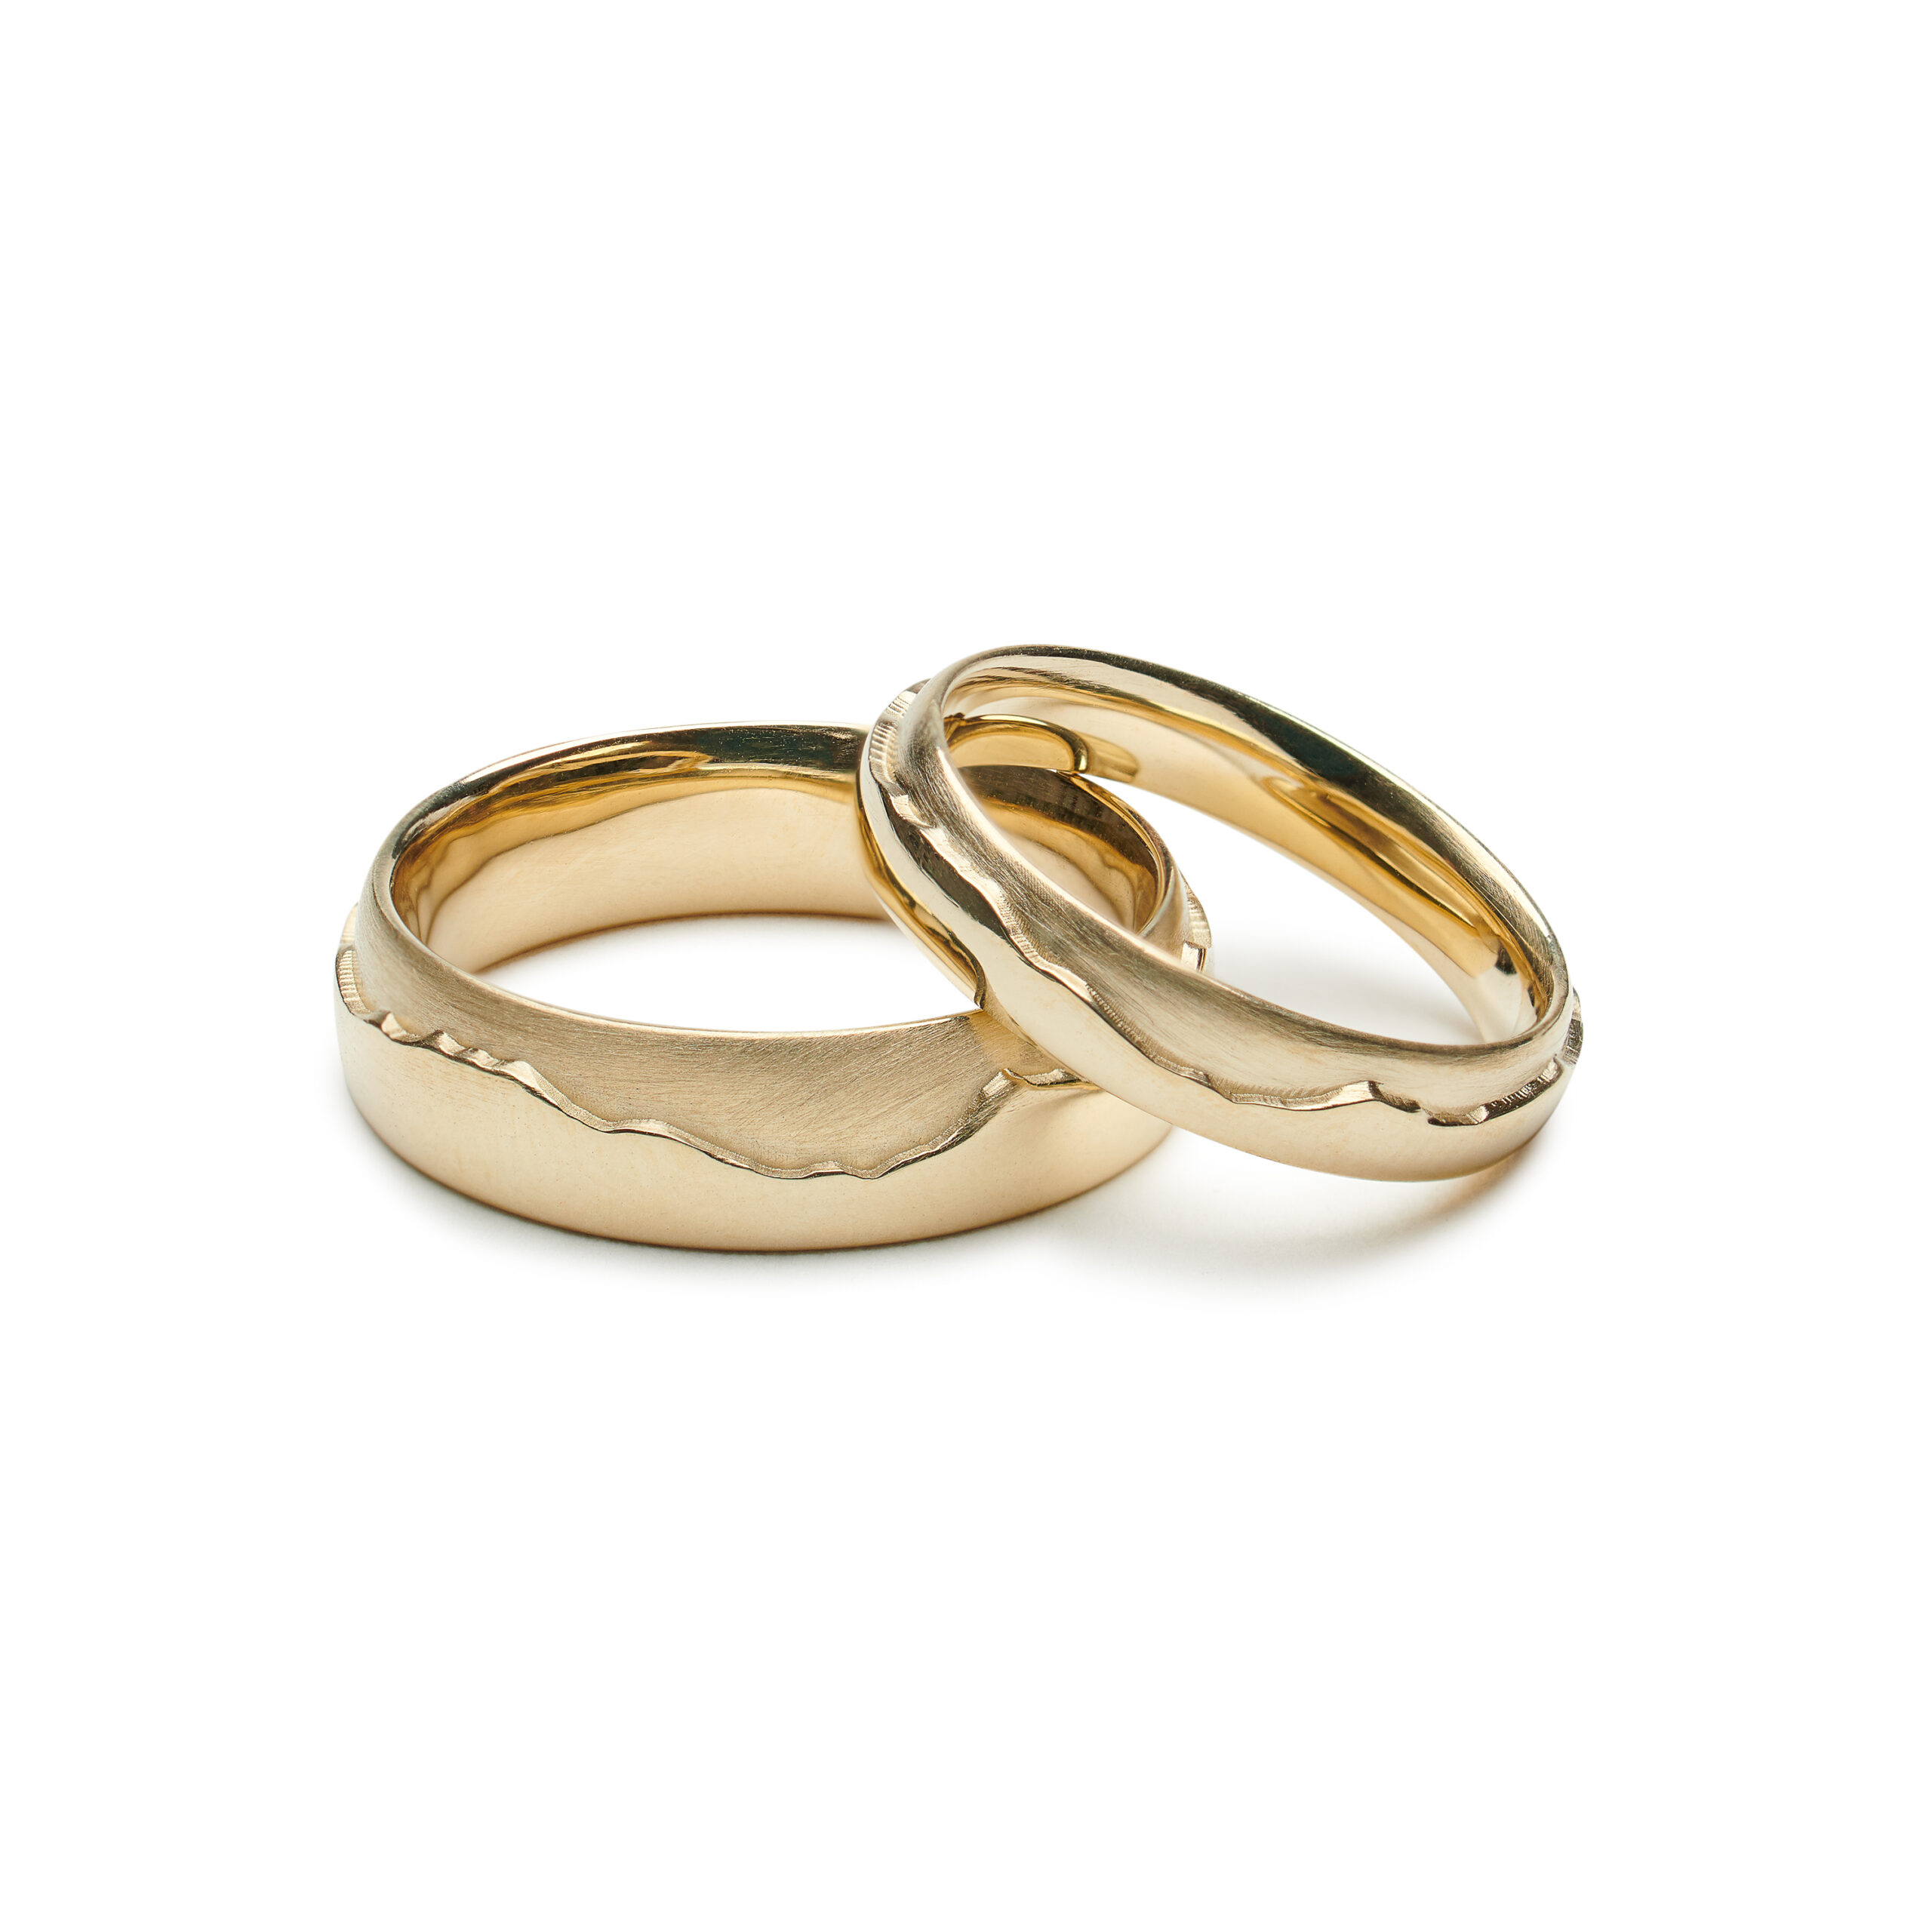 Gold rings depicting the profile of jay peak in vermont